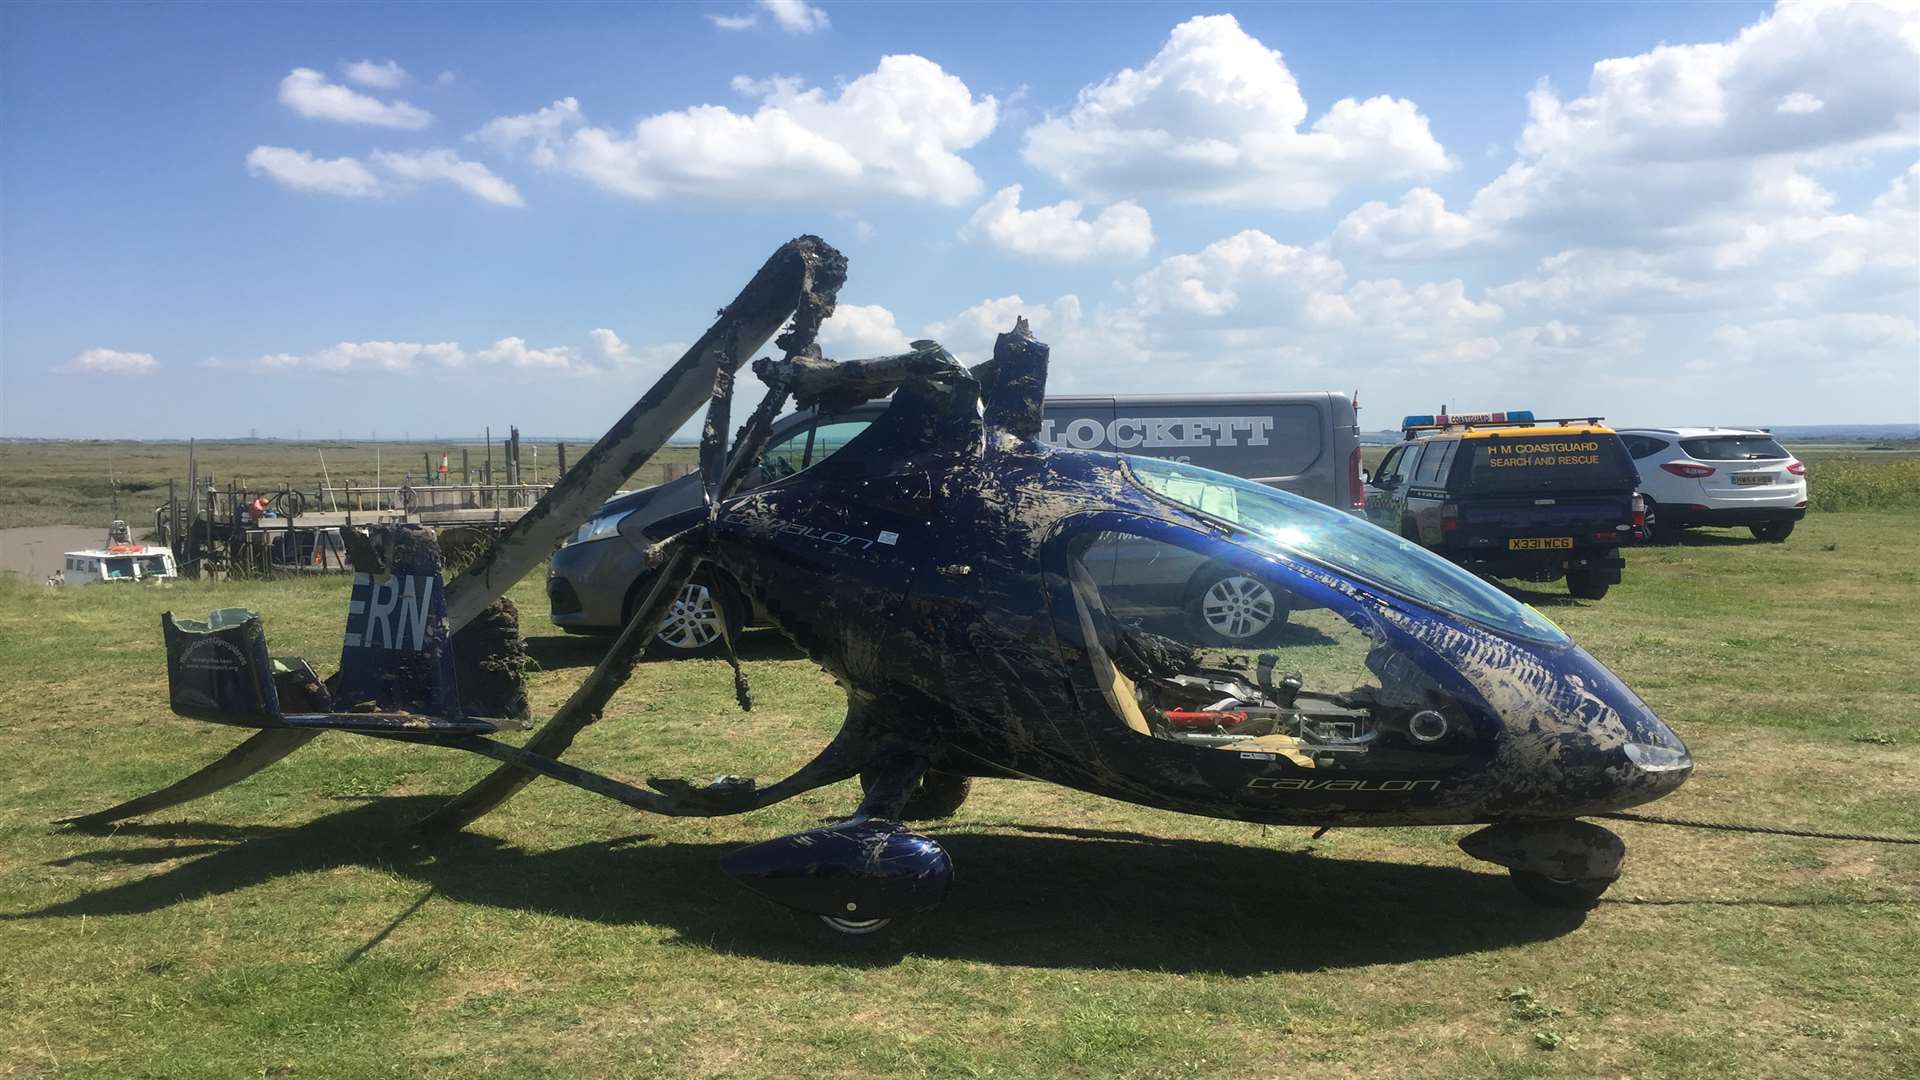 The ultralight helicopter crashed at Stoke Creek.